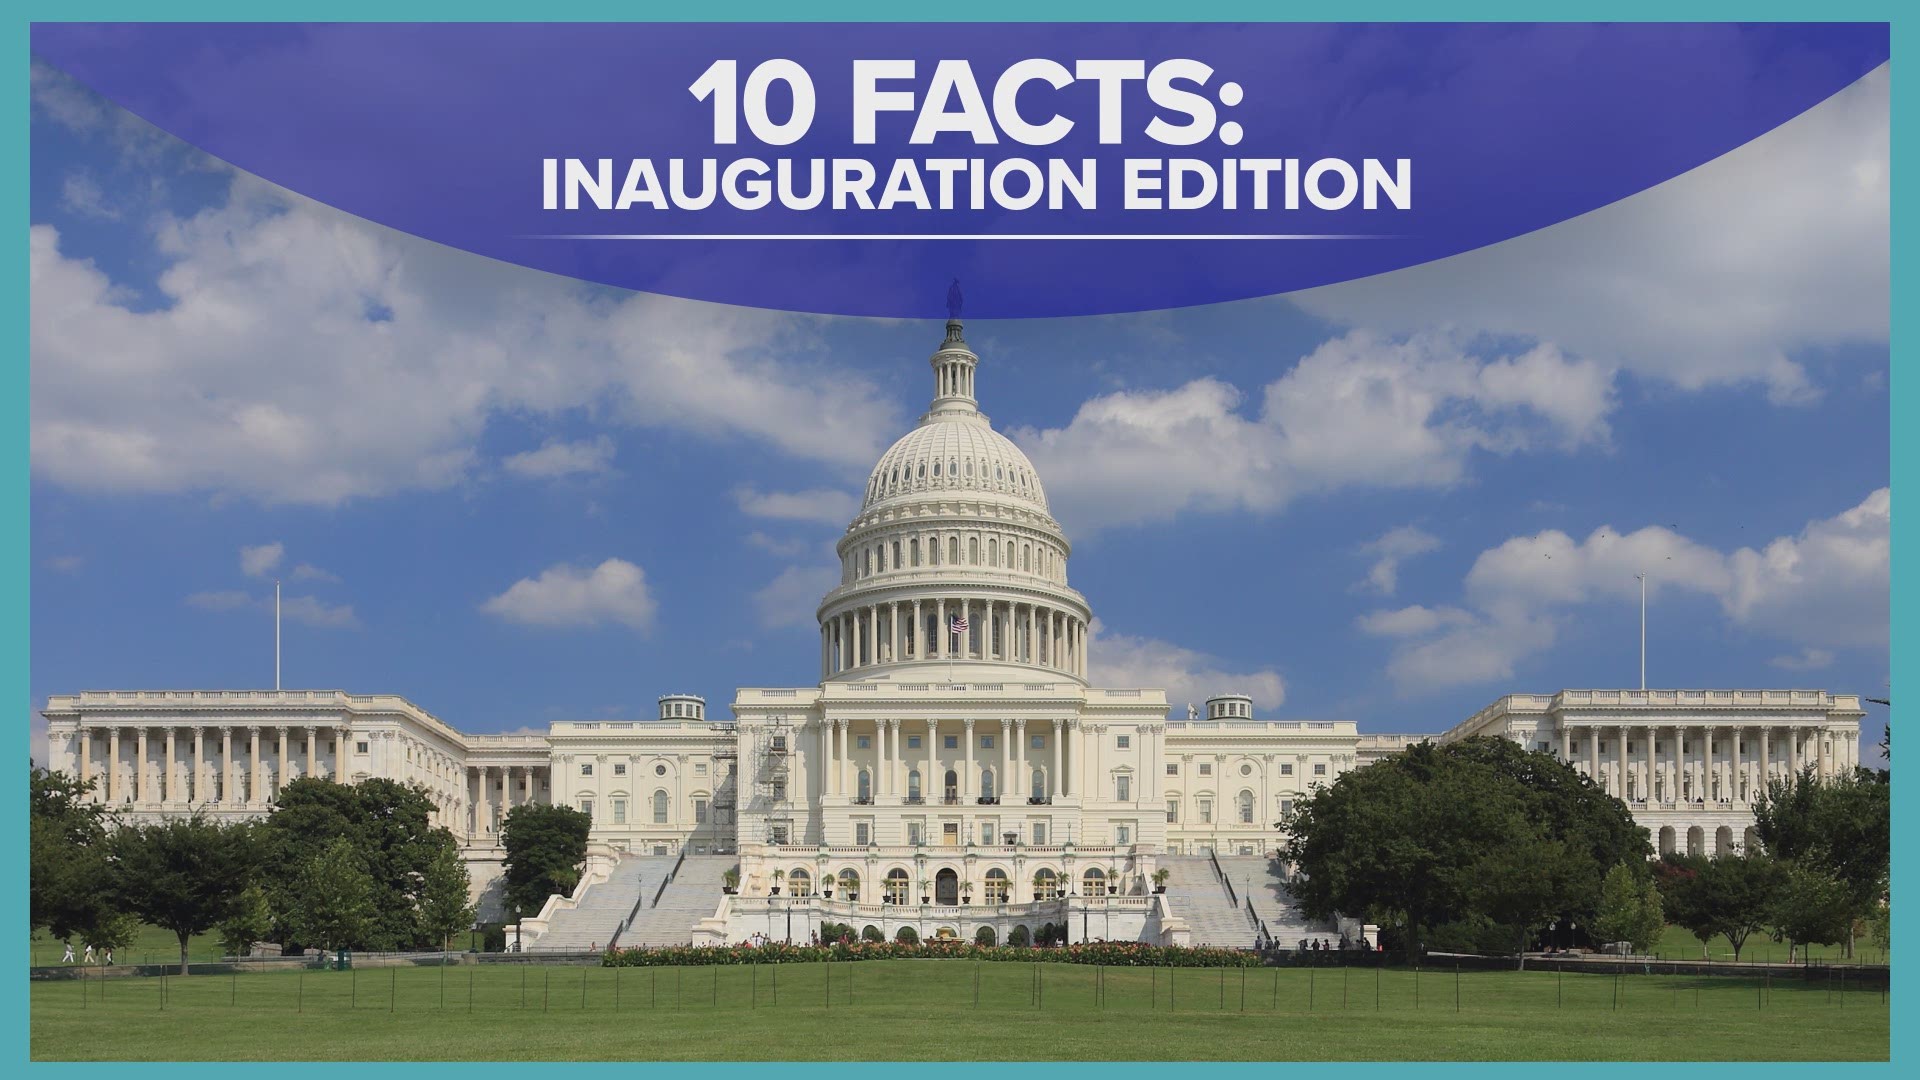 Here are 10 facts about past inaugurations, Joe Biden and Kamala Harris.